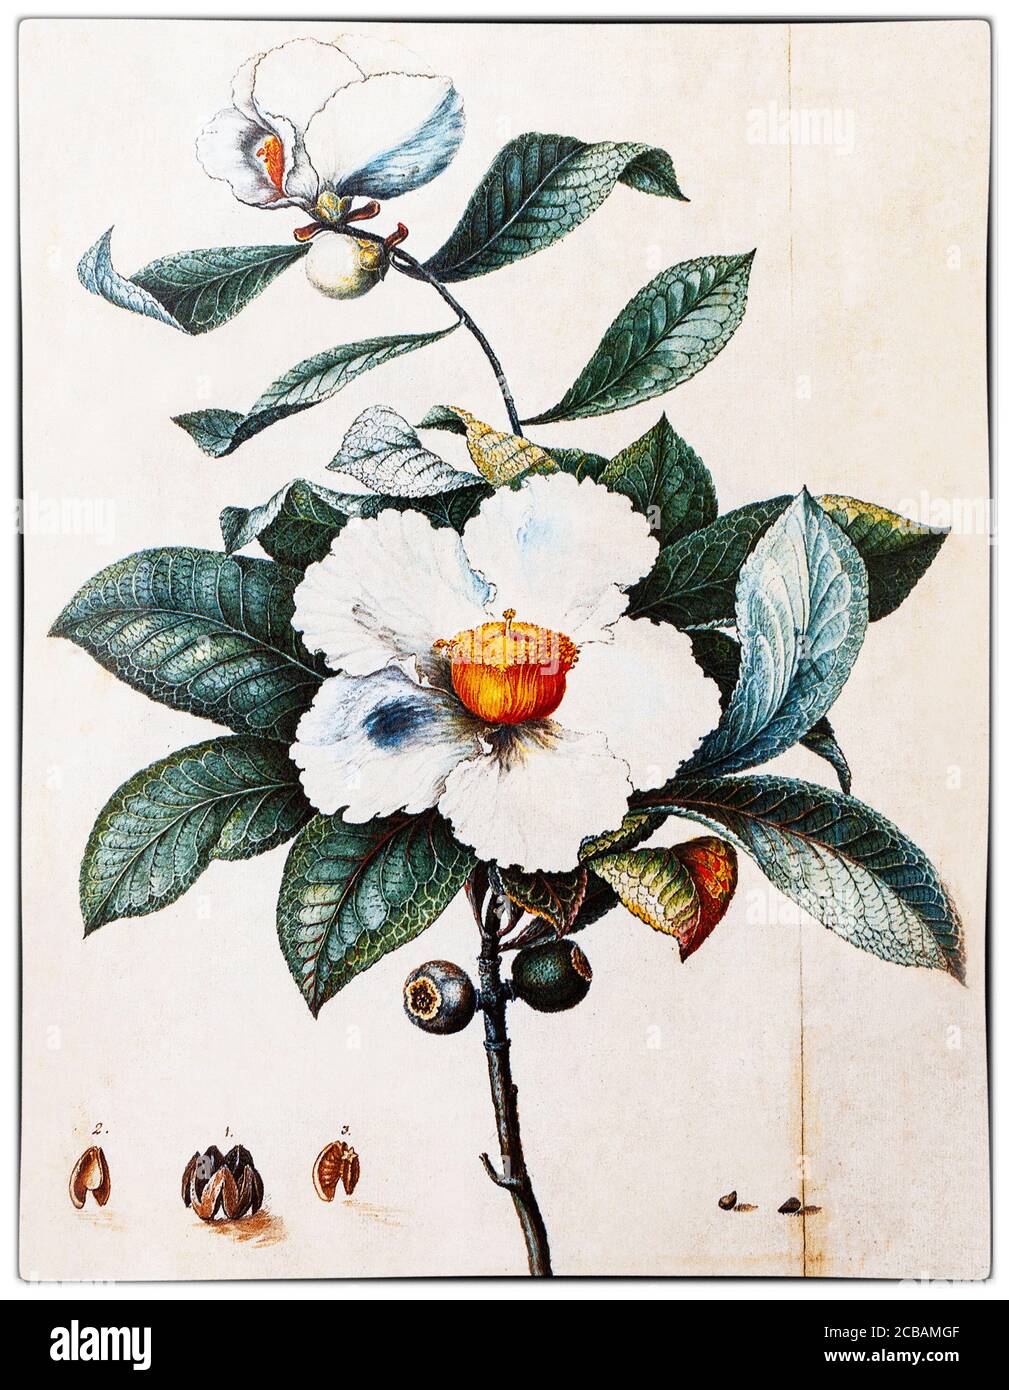 Flowers of the Franklin tree, Franklinia alatamaha, painted by William Bartram (1739-1823),an American naturalist, son of the naturalist John Bartram who was appointed Royal Botanist for North America by King George III in 1765. In that same year, John Bartram and his son William discovered franklinia growing in a 2-3 acre tract along the banks of the Altamaha River in southeastern Georgia. Stock Photo